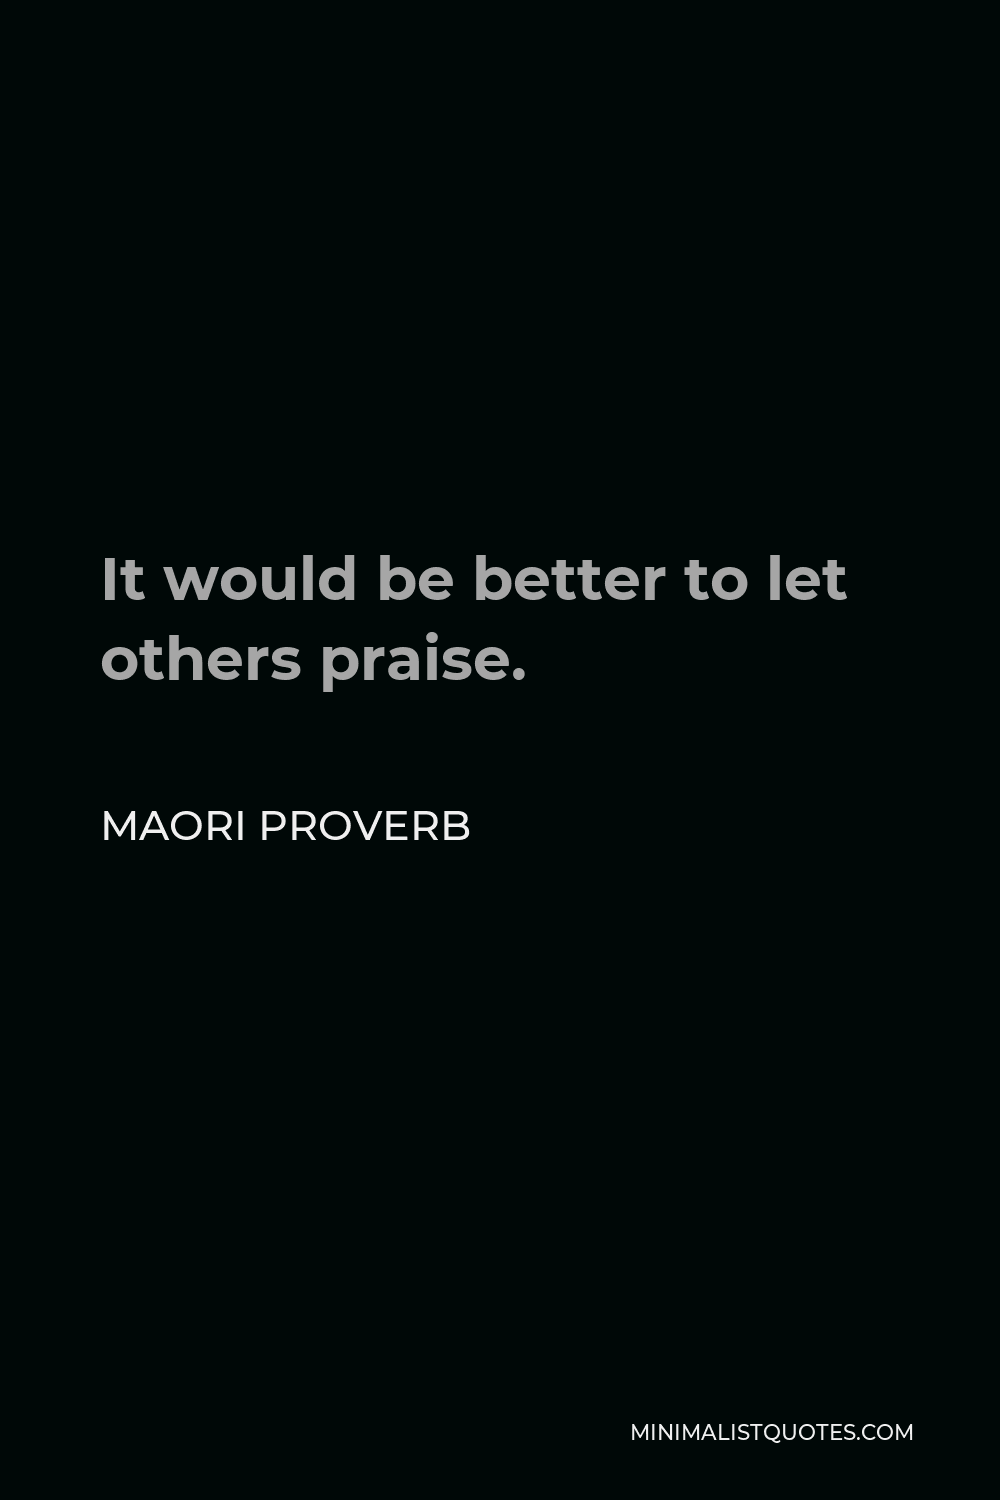 Maori Proverb Quote - It would be better to let others praise.